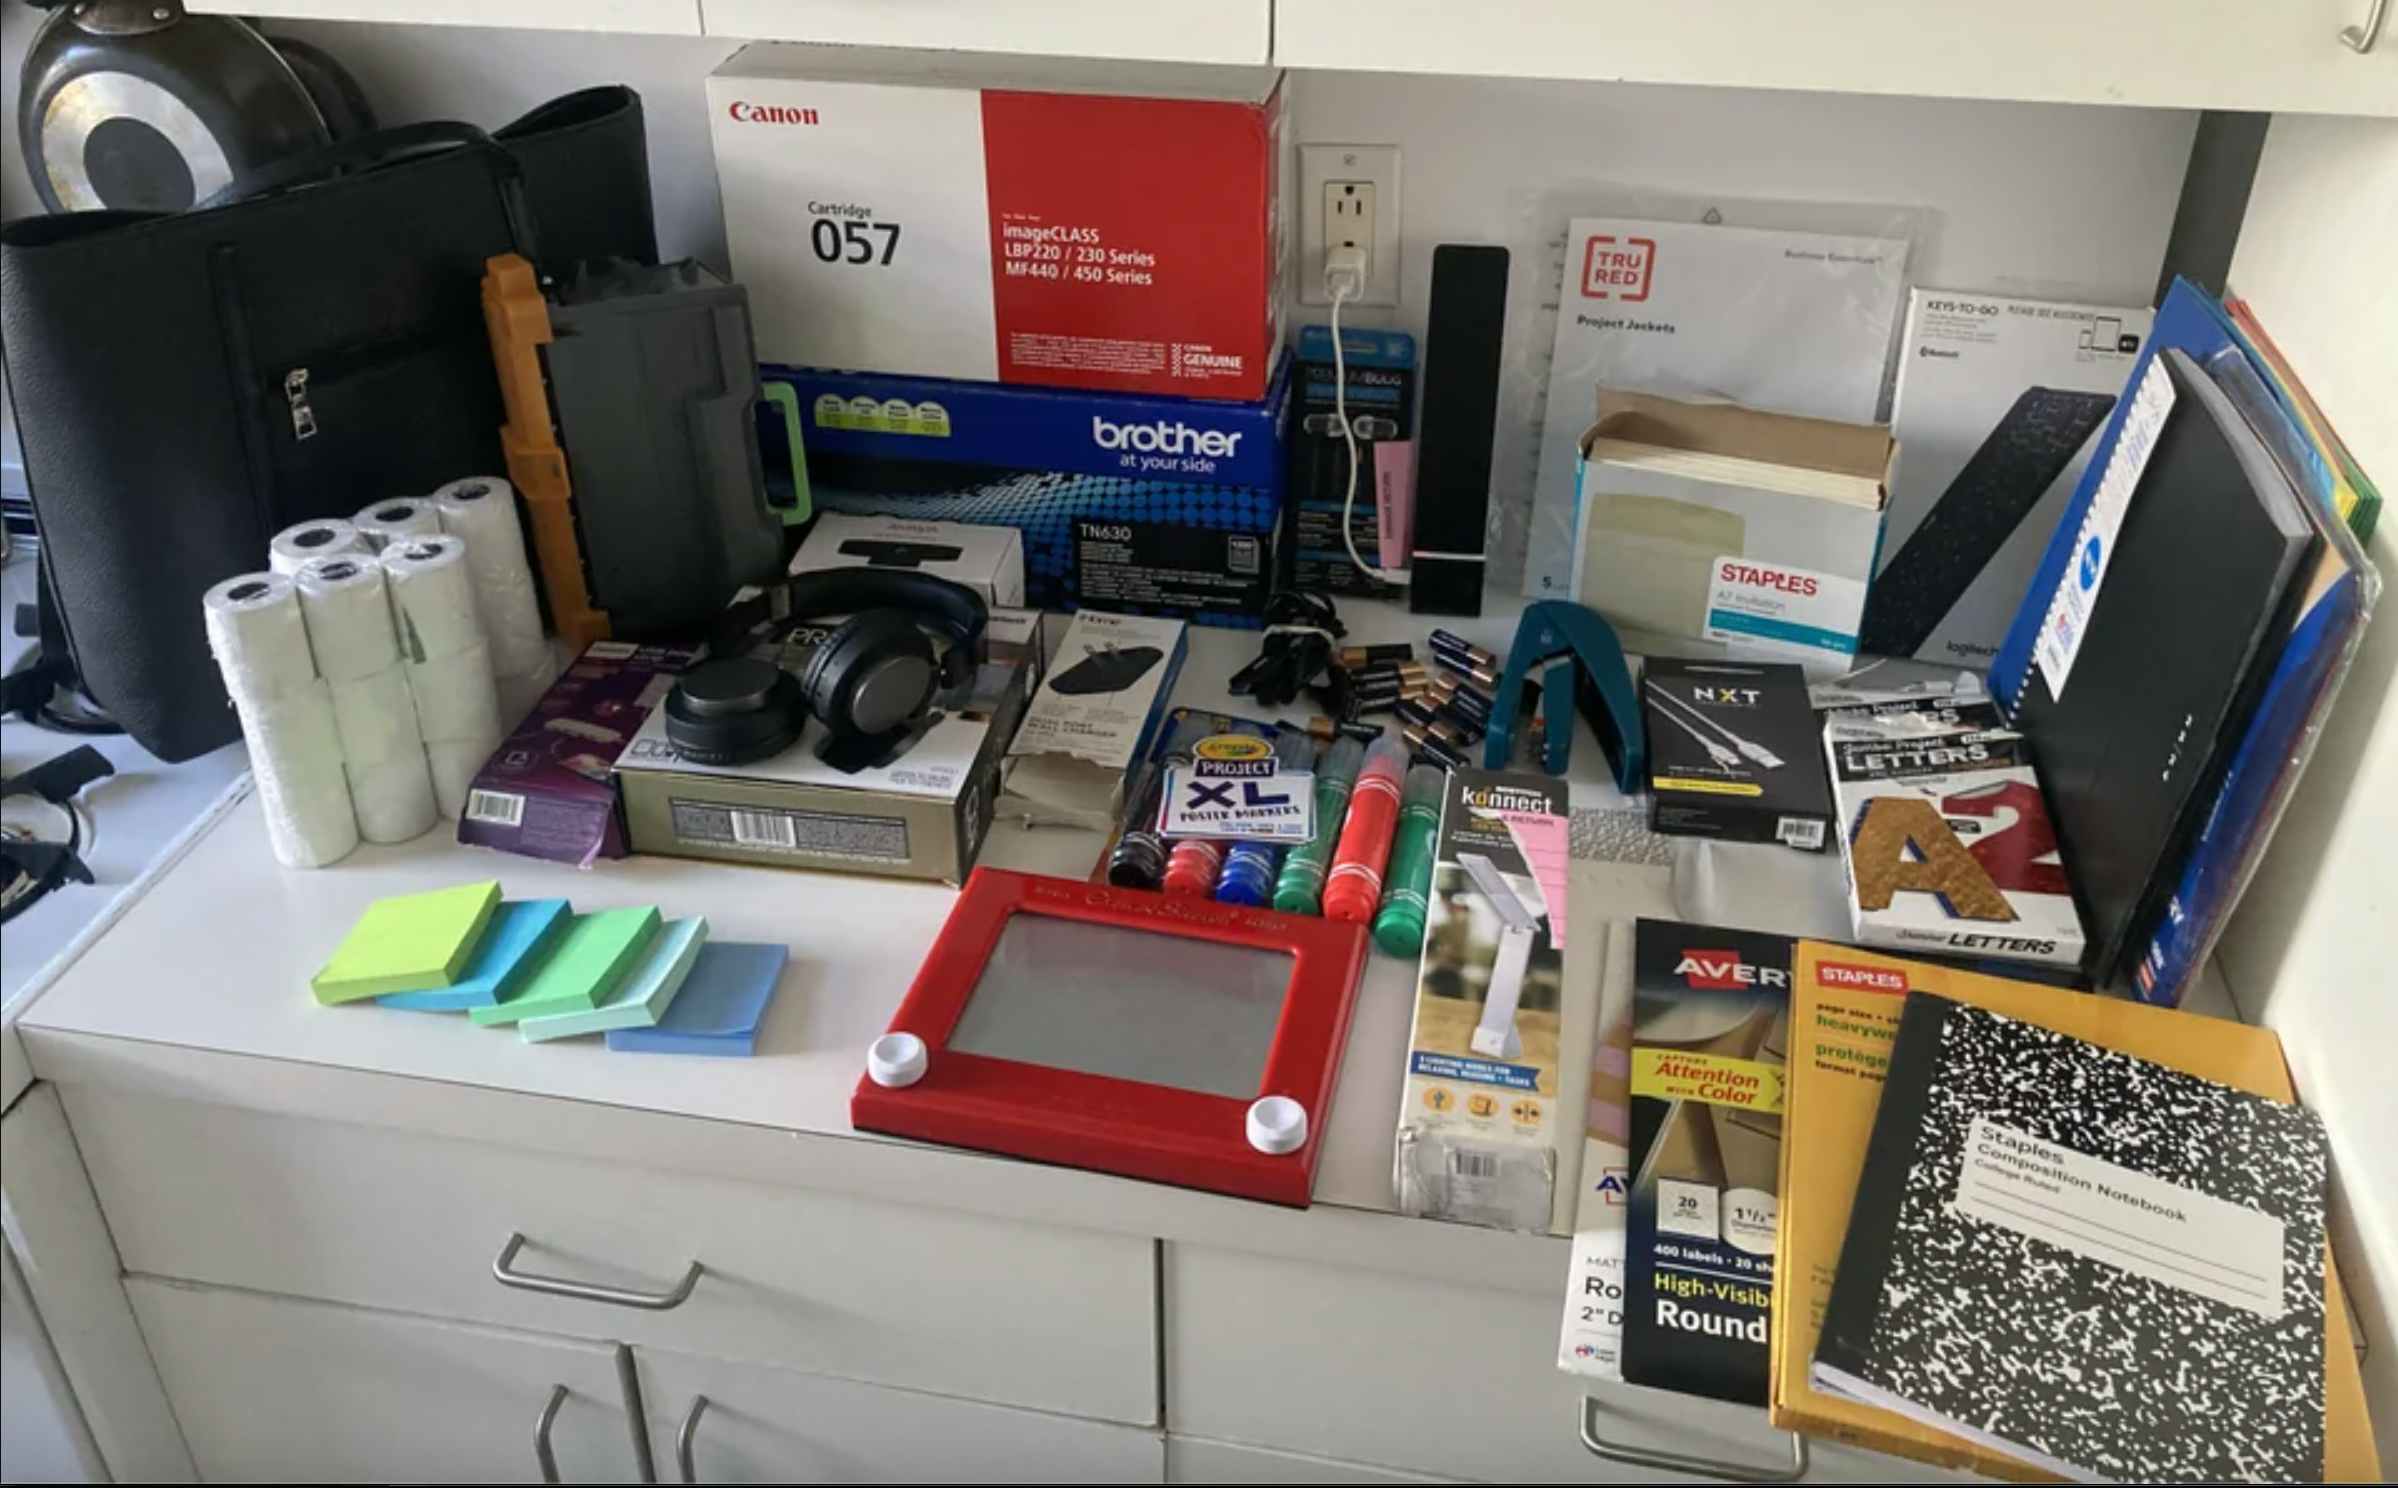 A bunch of products retrieved from a Staples office dumpster